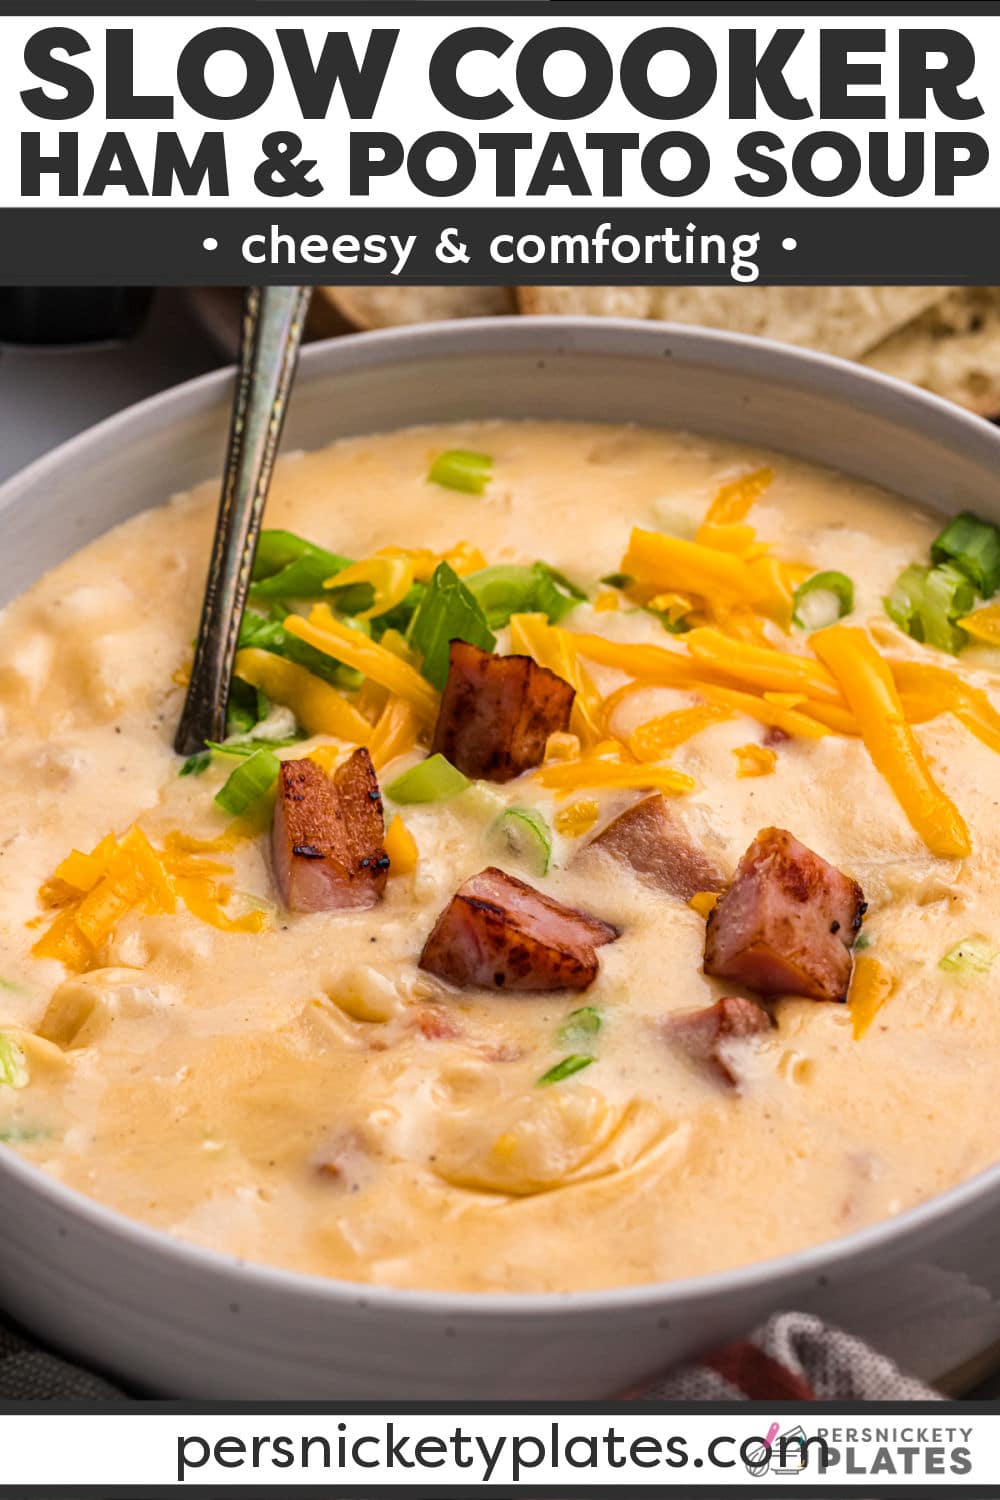 Slow Cooker Cheesy Ham and Potato Soup is a simple soup with tons of flavor! It’s made with potatoes, ham, onions, chicken stock, and two kinds of cheese all dumped into the crockpot and ready to serve at the end of the day. This cheesy soup is hearty, filling, and is always a hit! | www.persnicketyplates.com